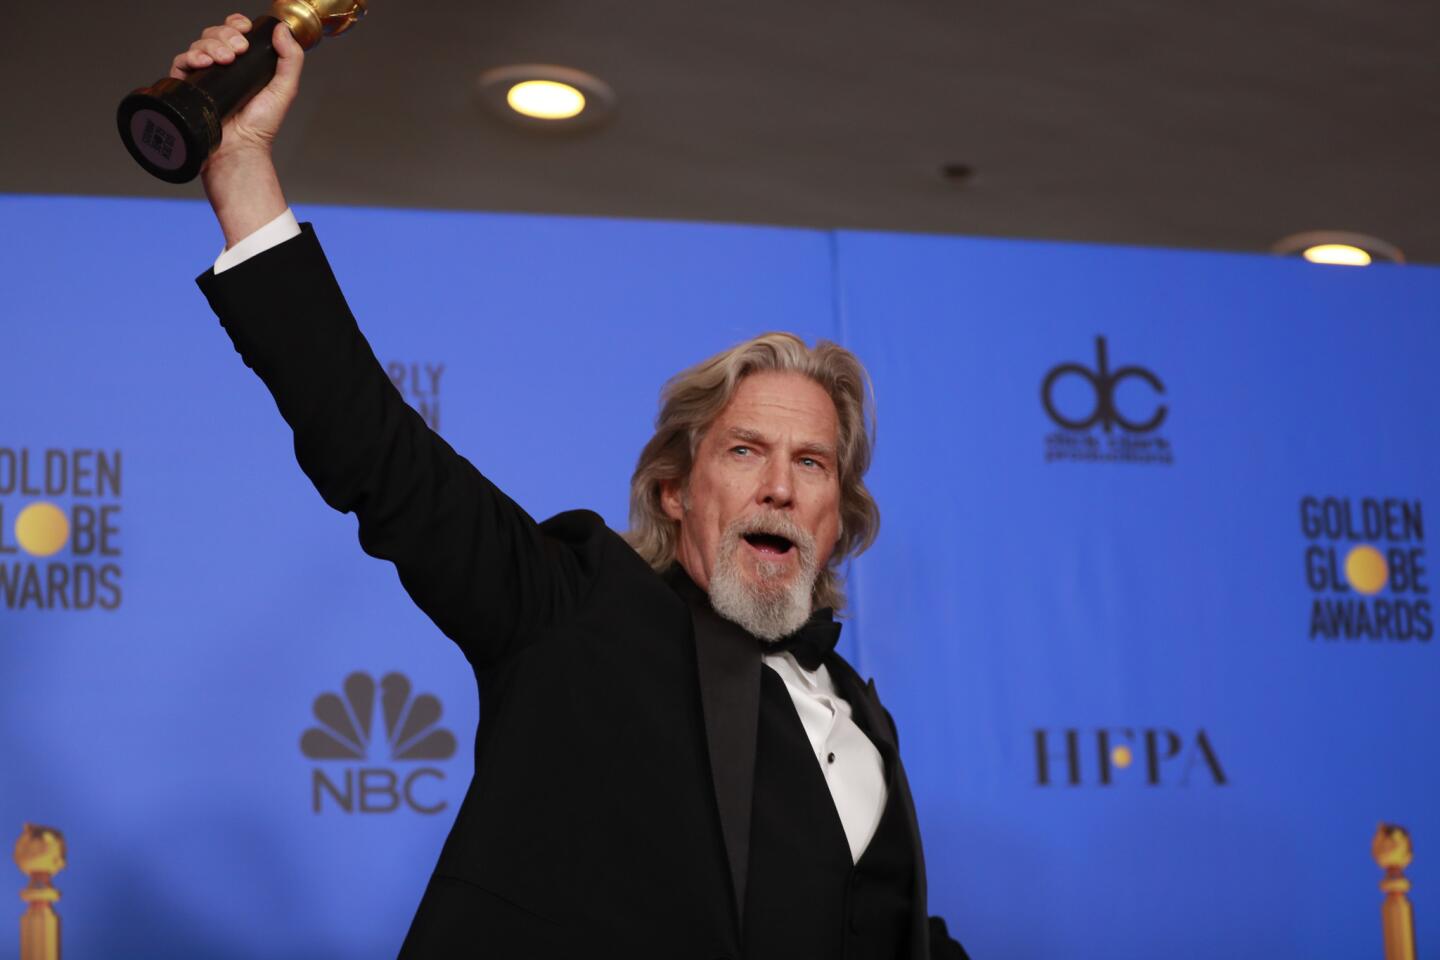 Jeff Bridges, who won the Cecil B. DeMille Award, in the Trophy Room at the 76th Golden Globes at the Beverly Hilton hotel on Sunday.